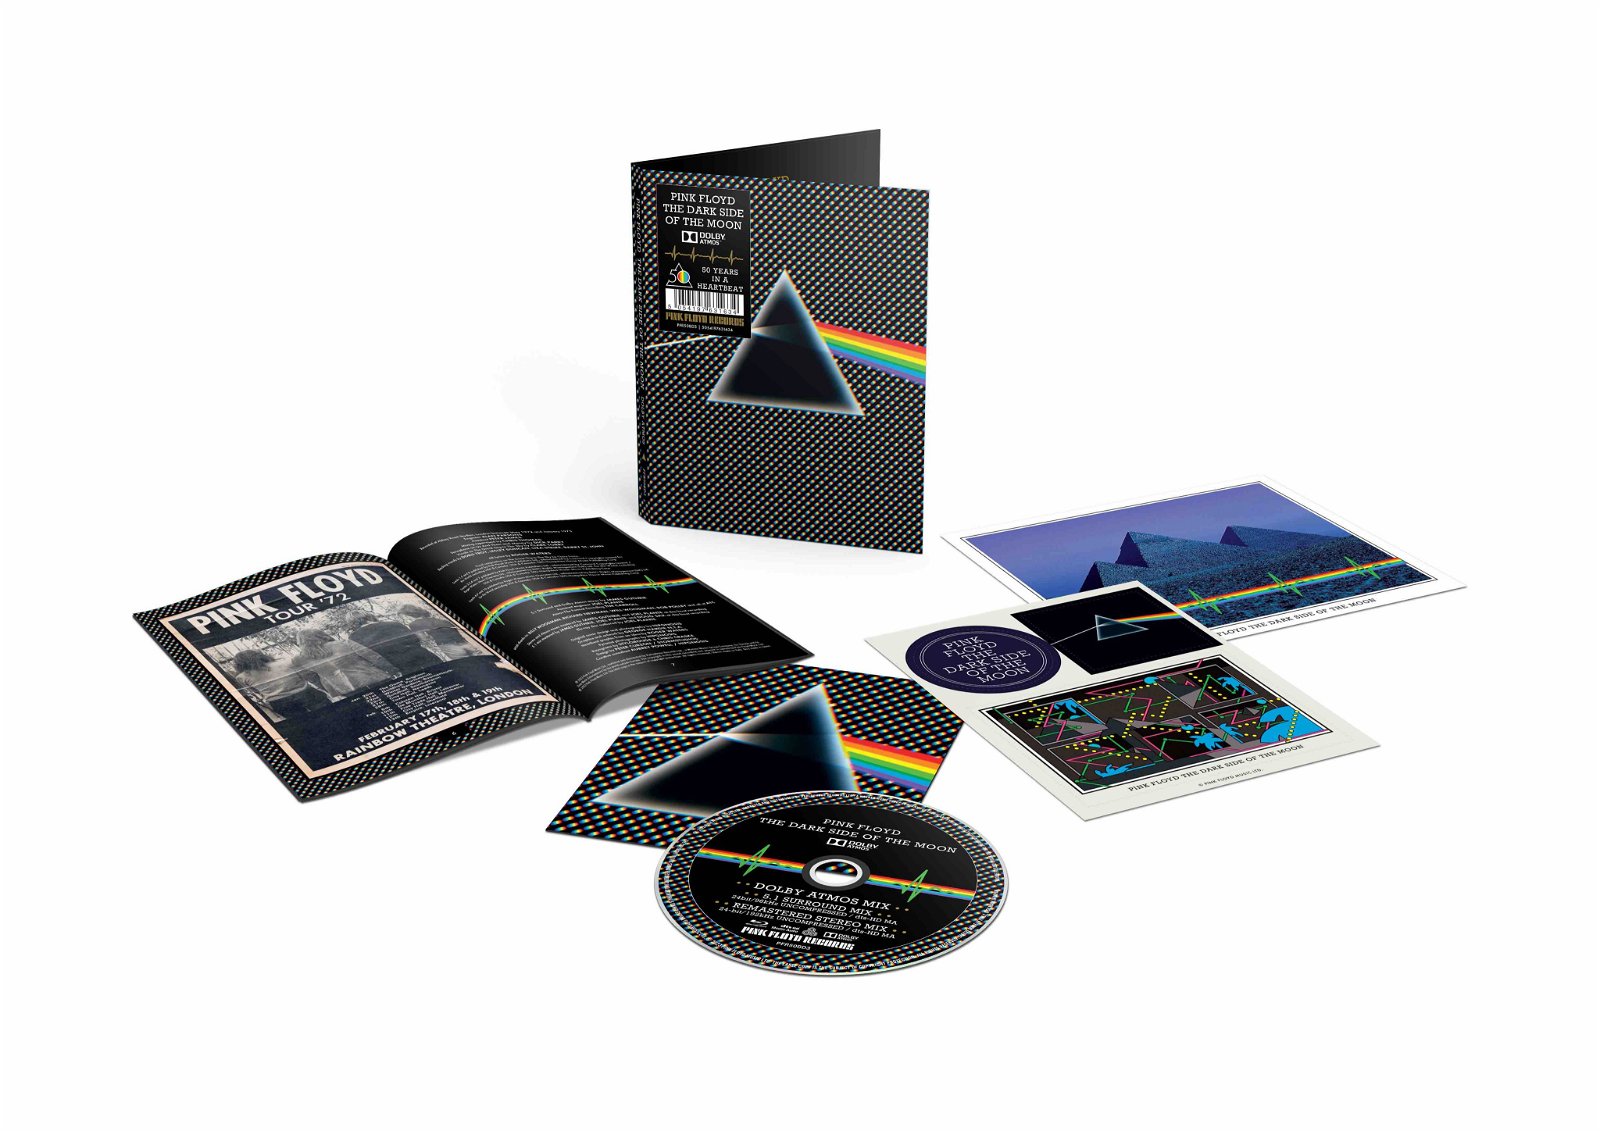 CD Shop - PINK FLOYD THE DARK SIDE OF THE MOON